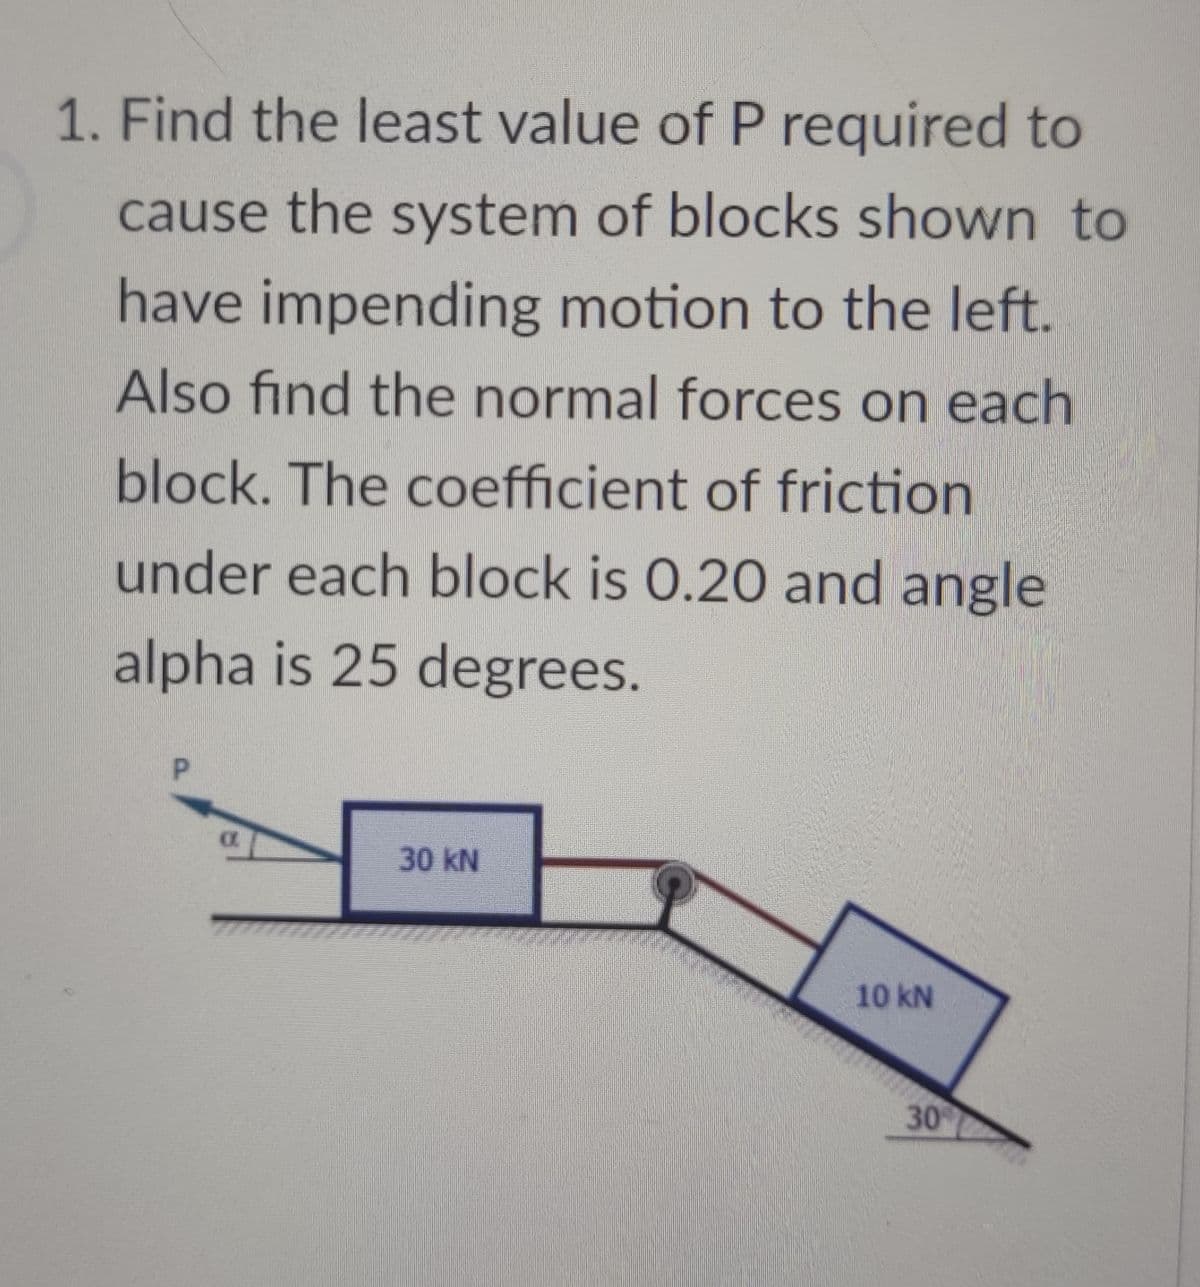 1. Find the least value of P required to
cause the system of blocks shown to
have impending motion to the left.
Also find the normal forces on each
block. The coefficient of friction
under each block is 0.20 and angle
alpha is 25 degrees.
P.
30 kN
10 kN
30
